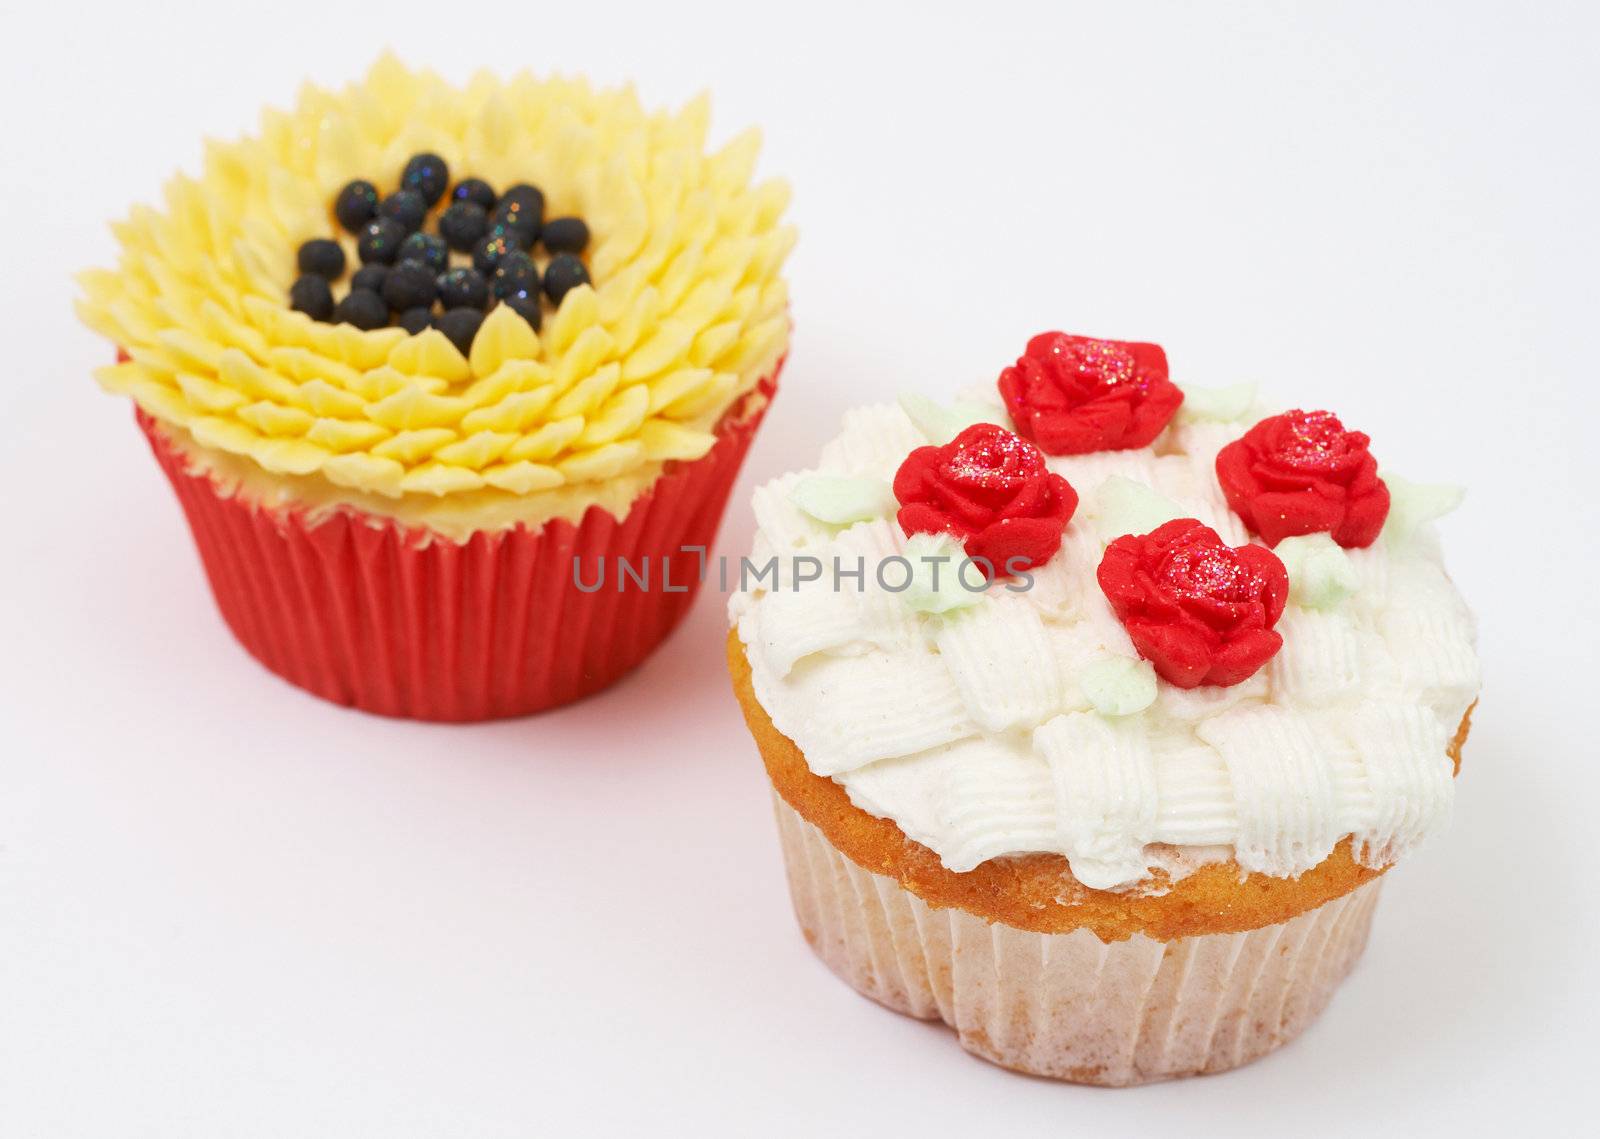 Two vanilla cupcakes with various decorations on white background